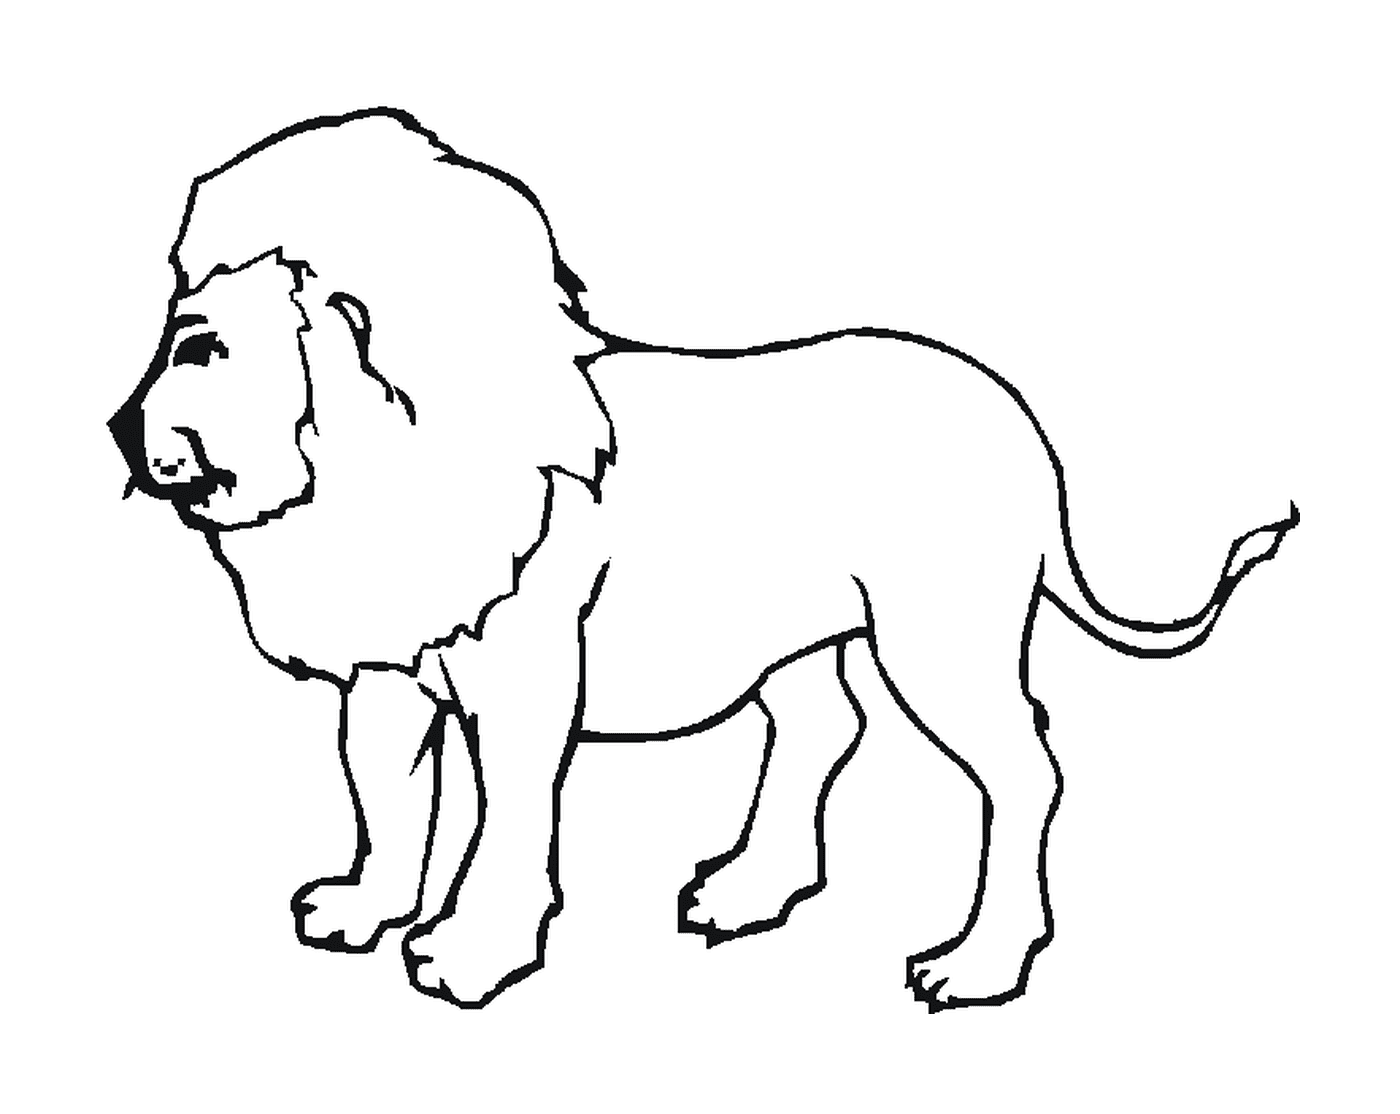  Lion of Barbary, majestic 